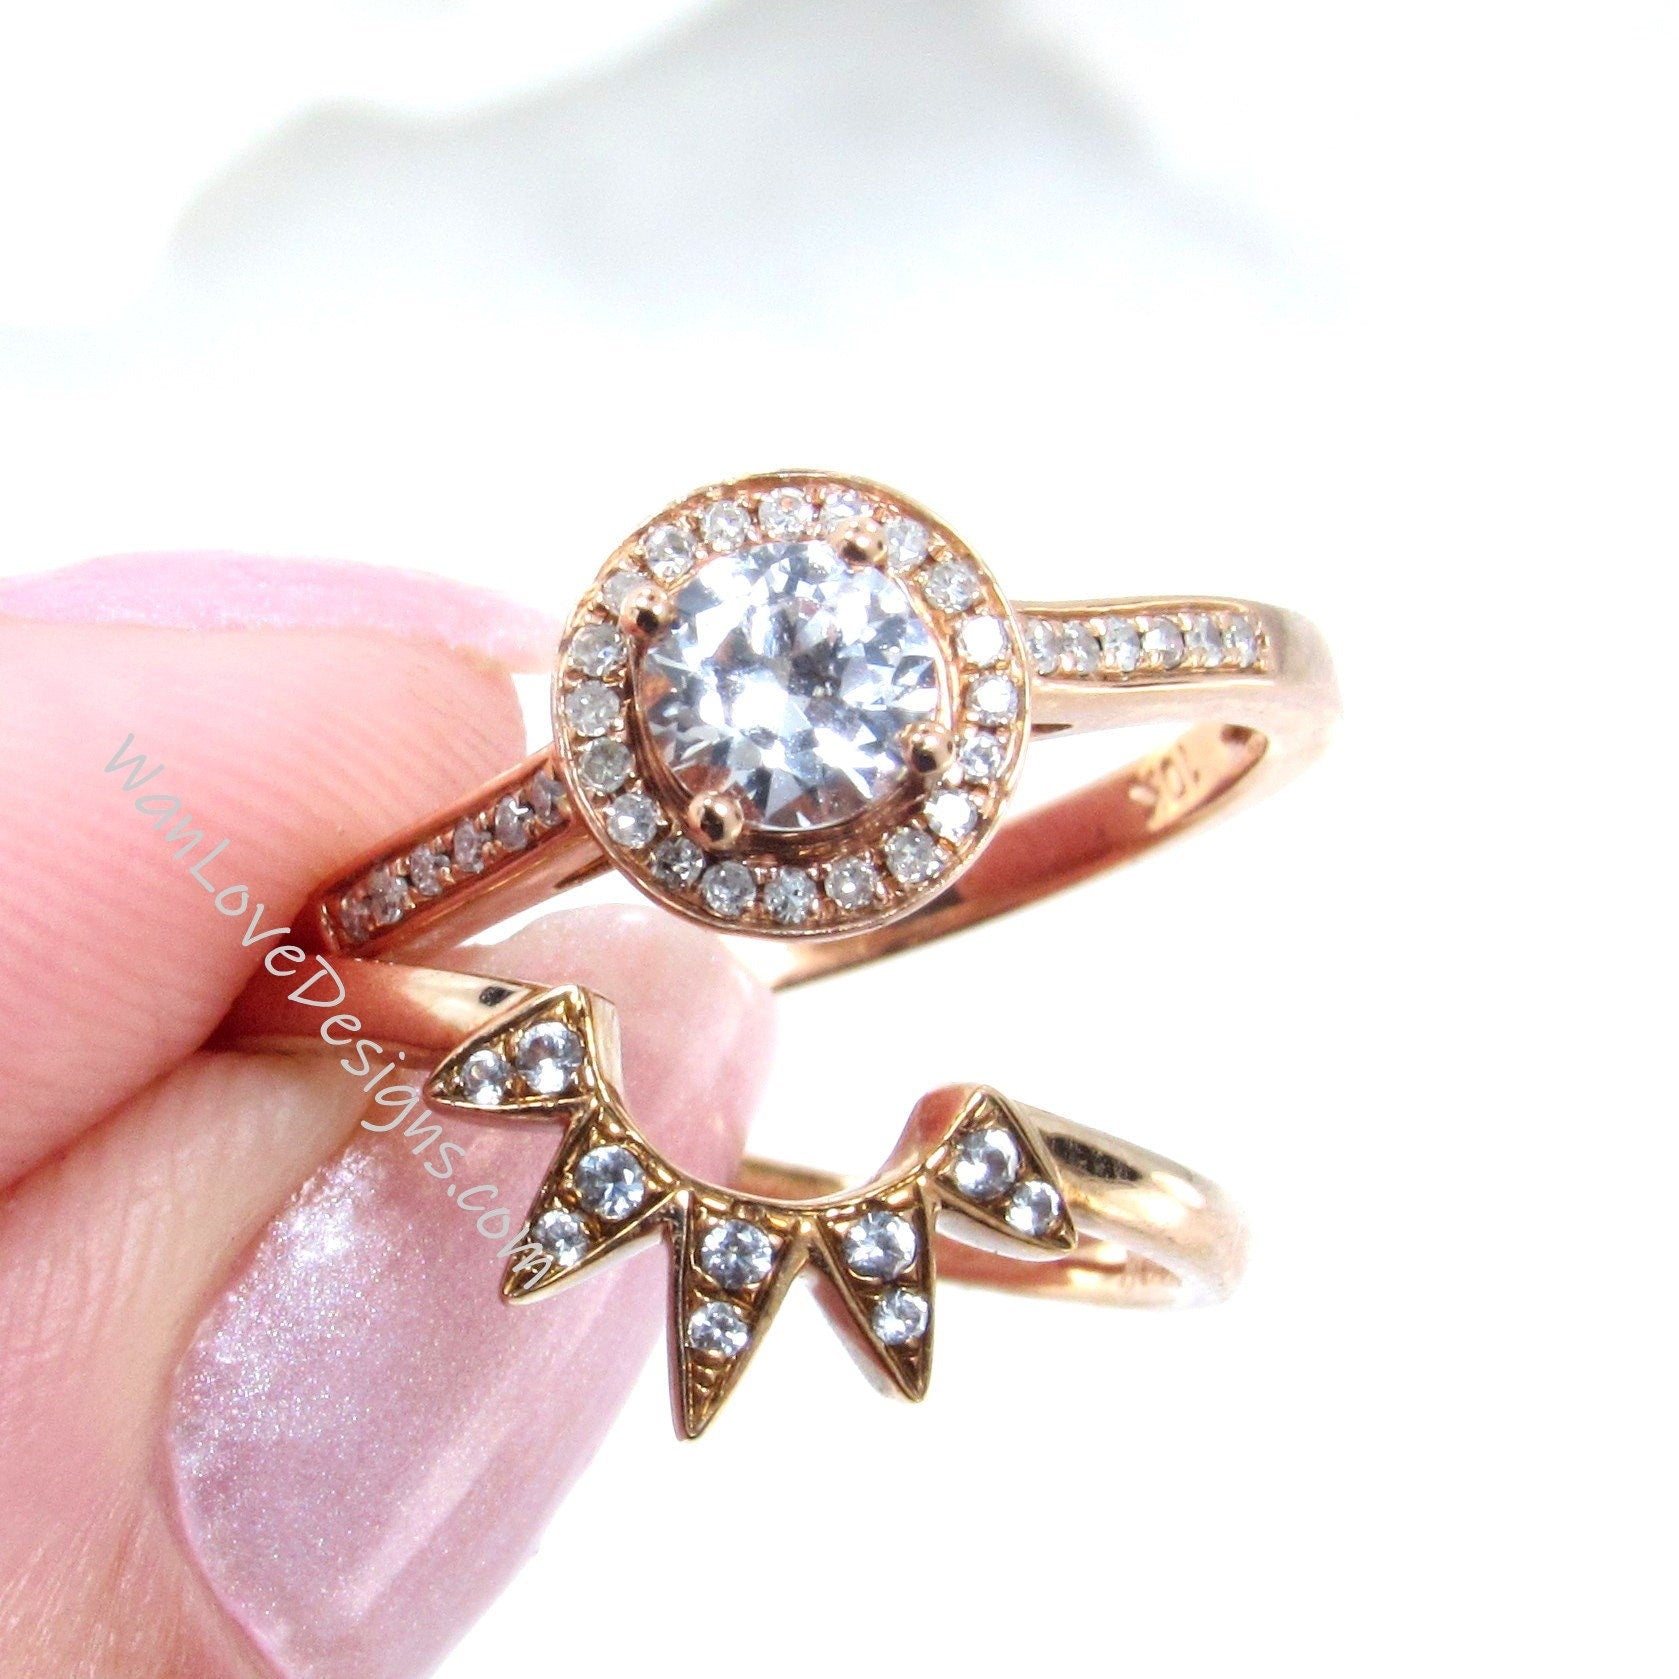 Rose Gold White Sapphire Round Cut Diamond Halo Engagement Ring, Round Diamond ring set, Sapphire Bridal ring set, Gift for her, Ready Ship Wan Love Designs